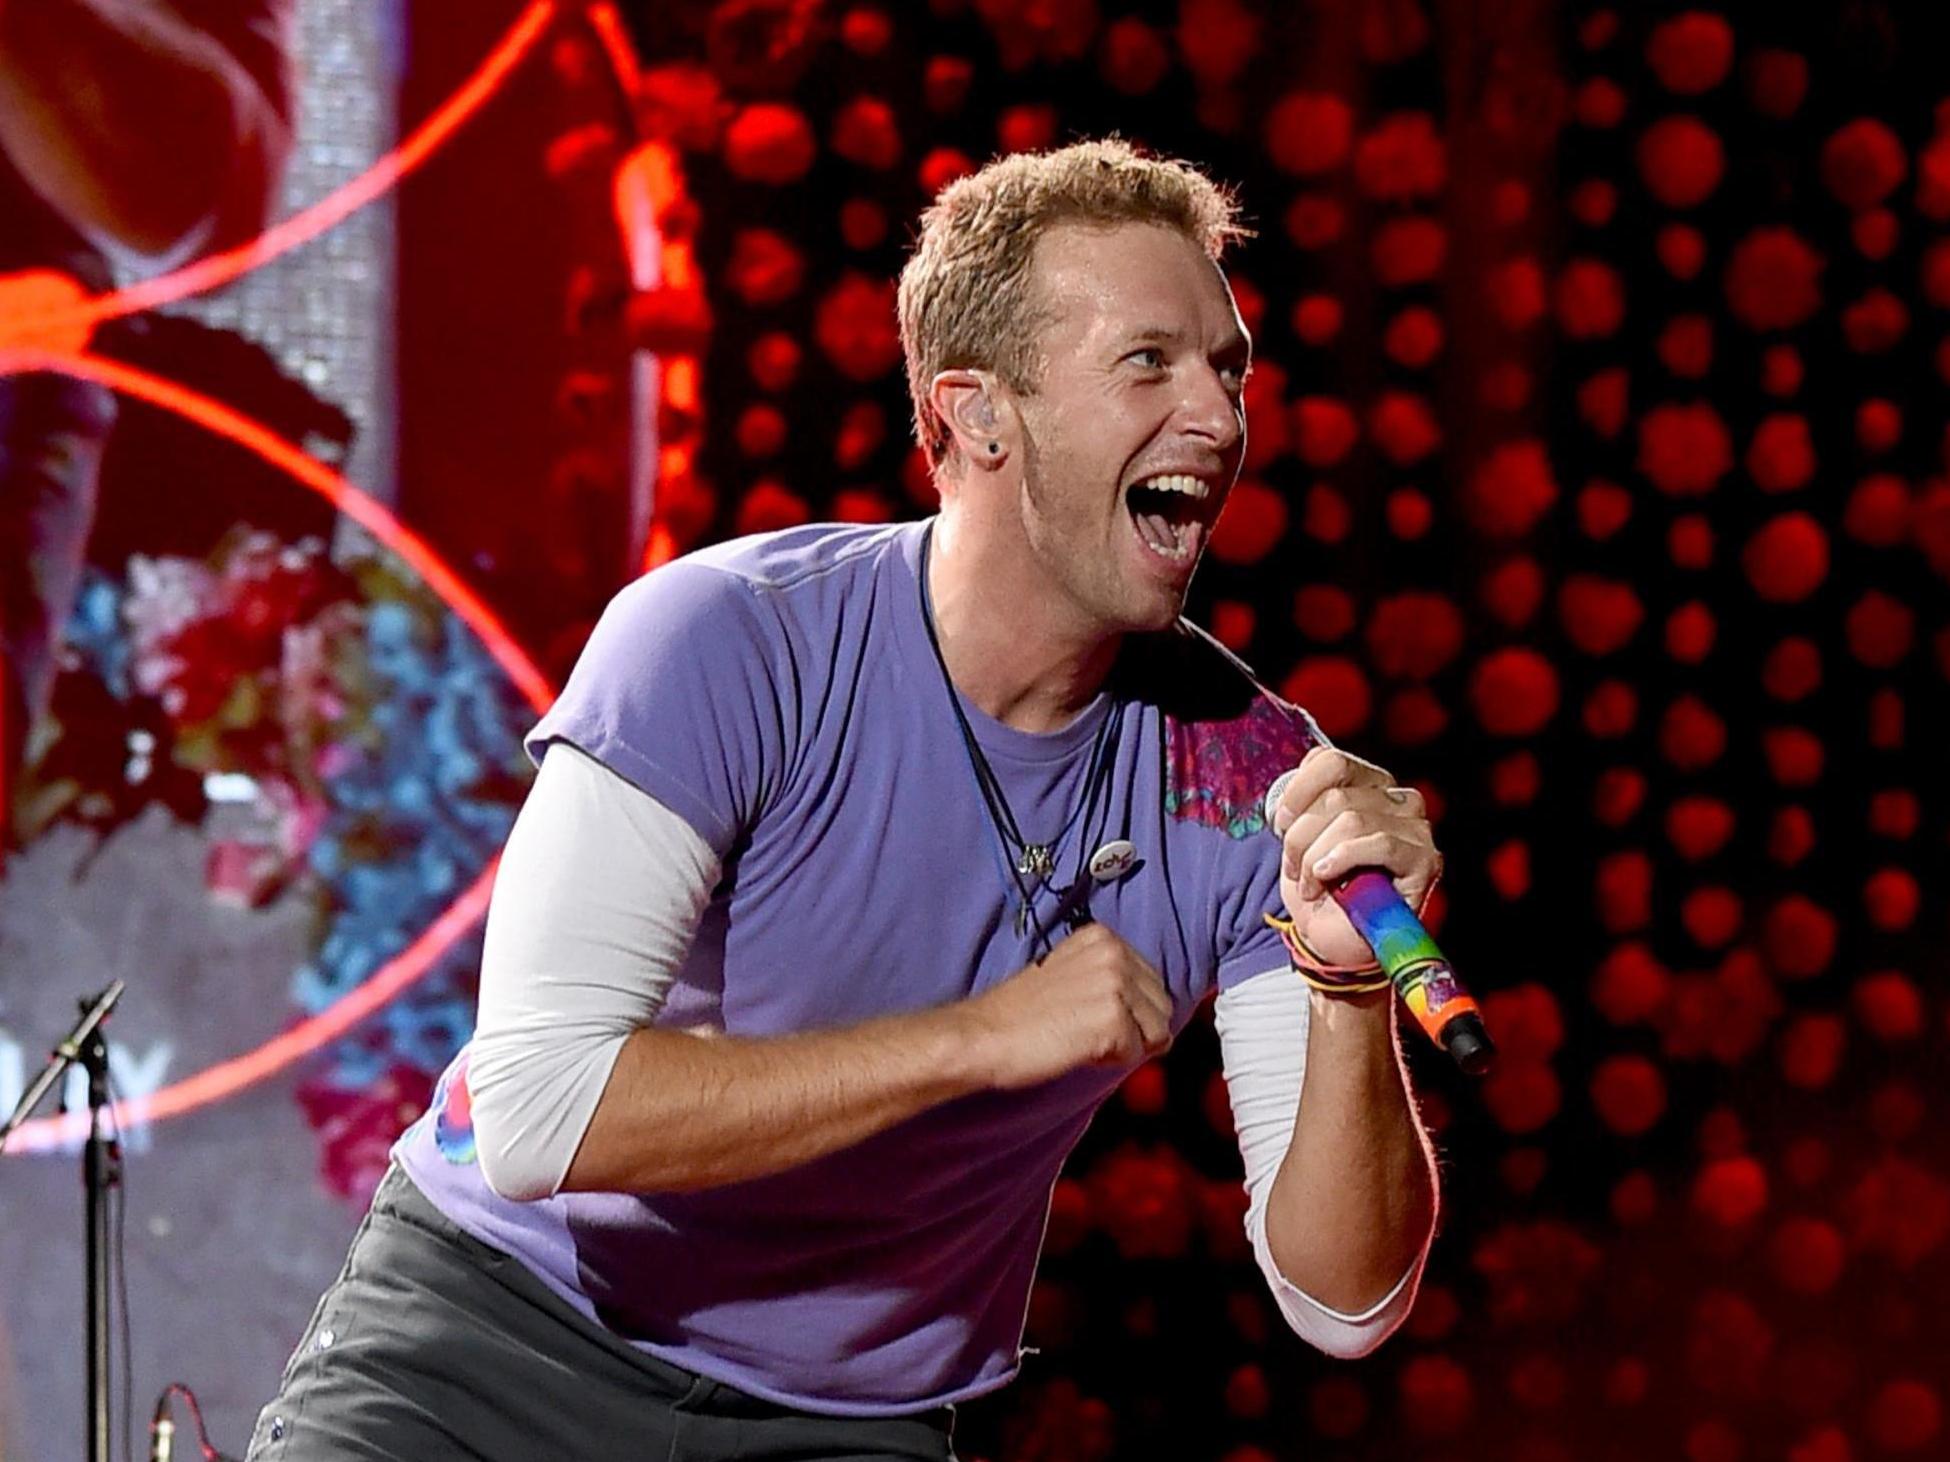 Chris Martin: Coldplay star wins extension of restraining order against woman who allegedly stalked him